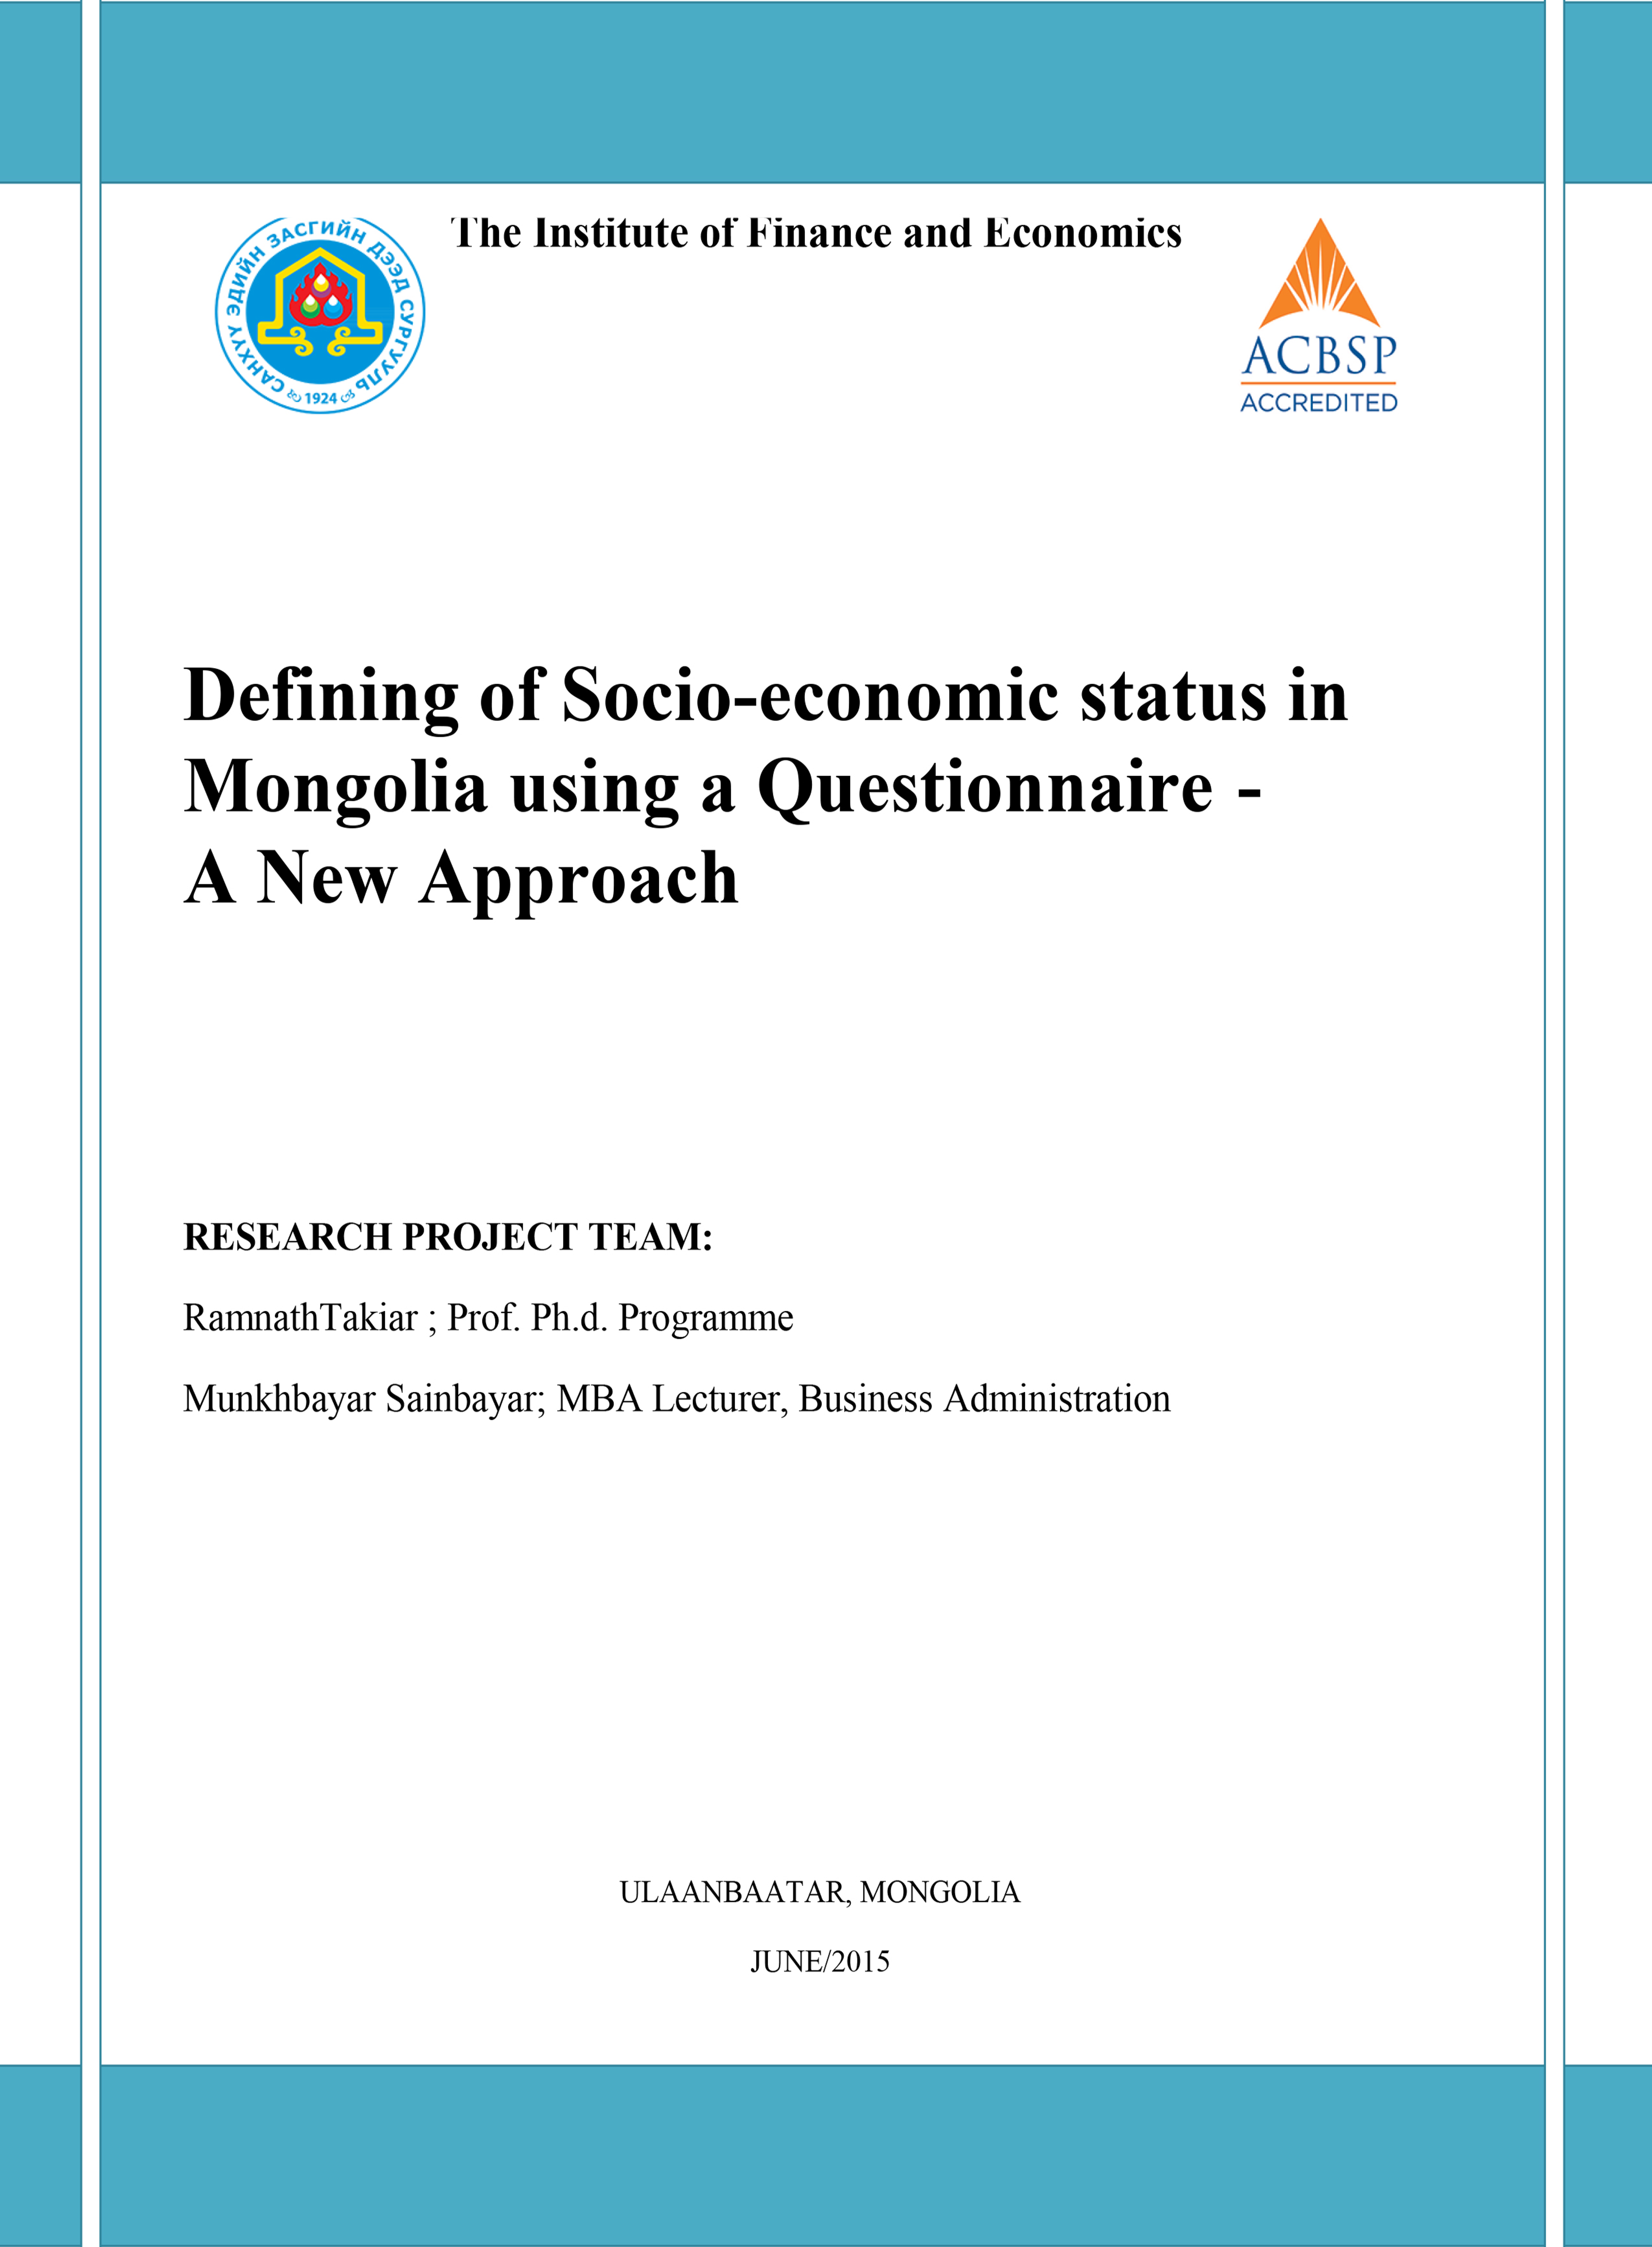 Defining of Socio-economic status in Mongolia using a Questionnaire - A New Approach